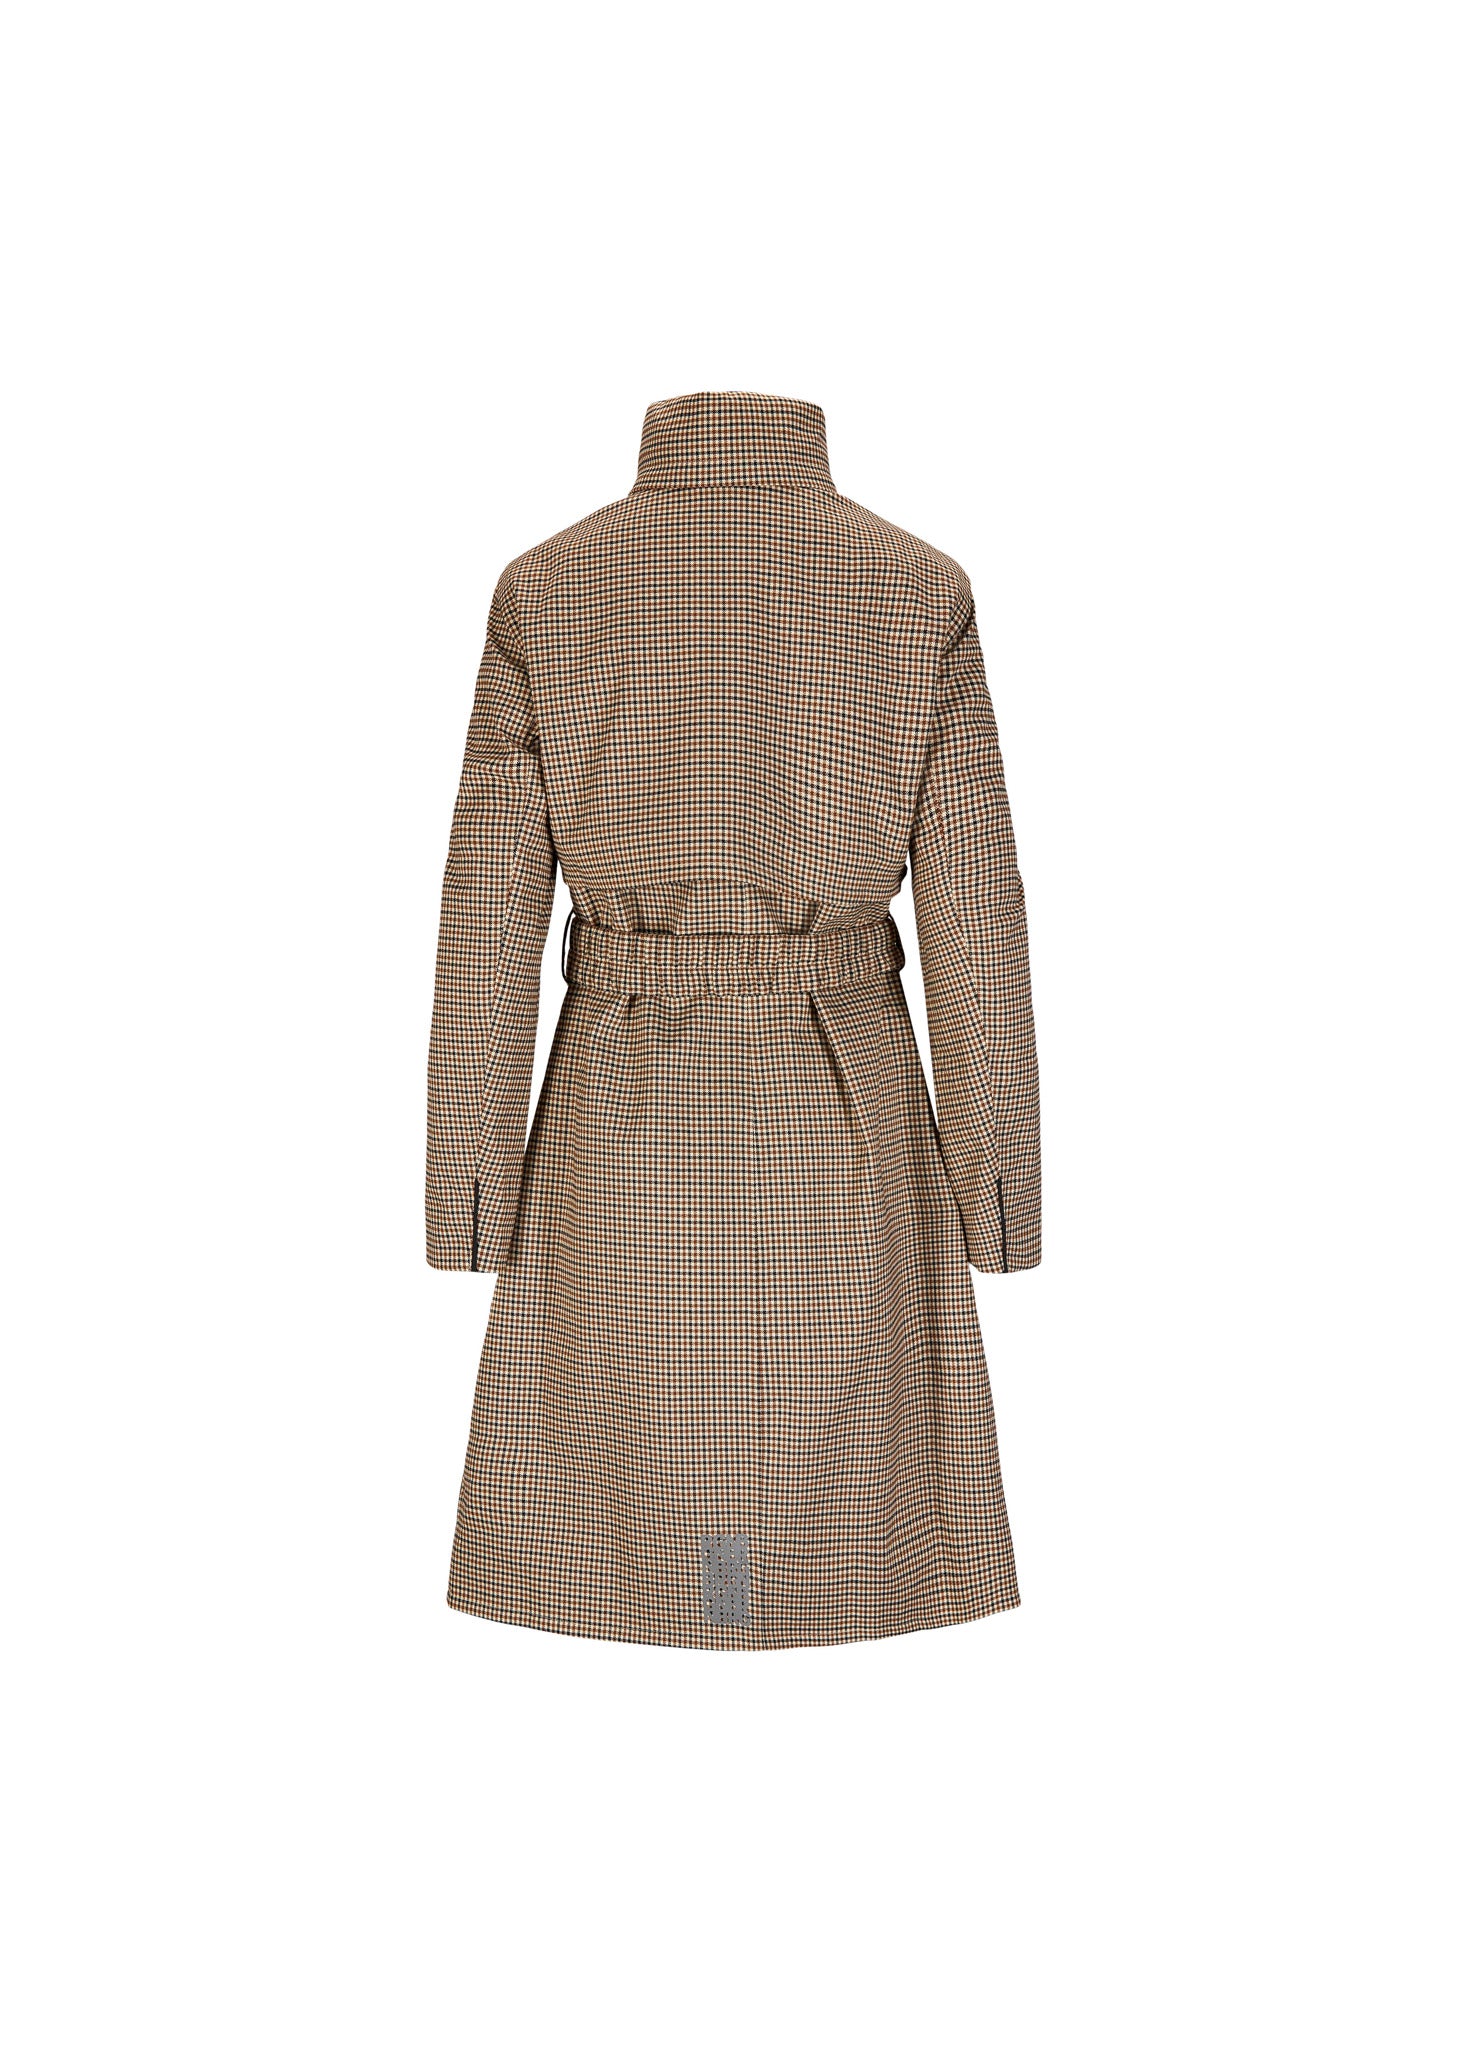 BRGN by Lunde & Gaundal Skyet Coat Coats 143 Check